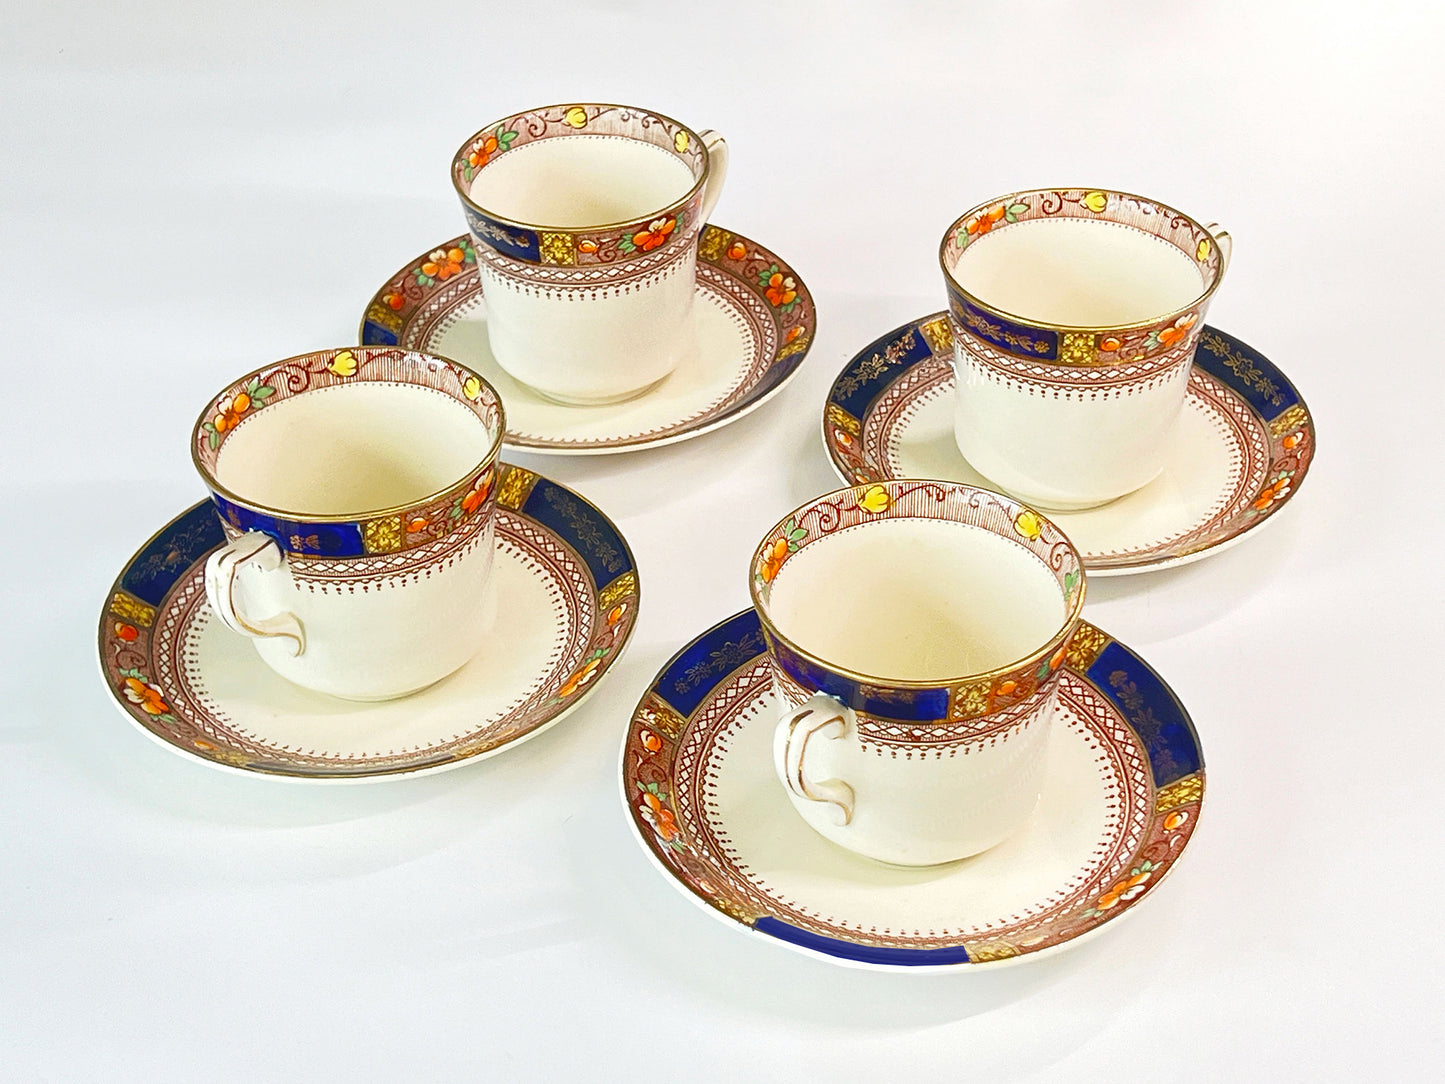 J_G-Meakin-Sol-Queen-Mary-Set-of-4-Tea-cups-and-Saucers.-1-Shop-eBargainsAndDeals.com